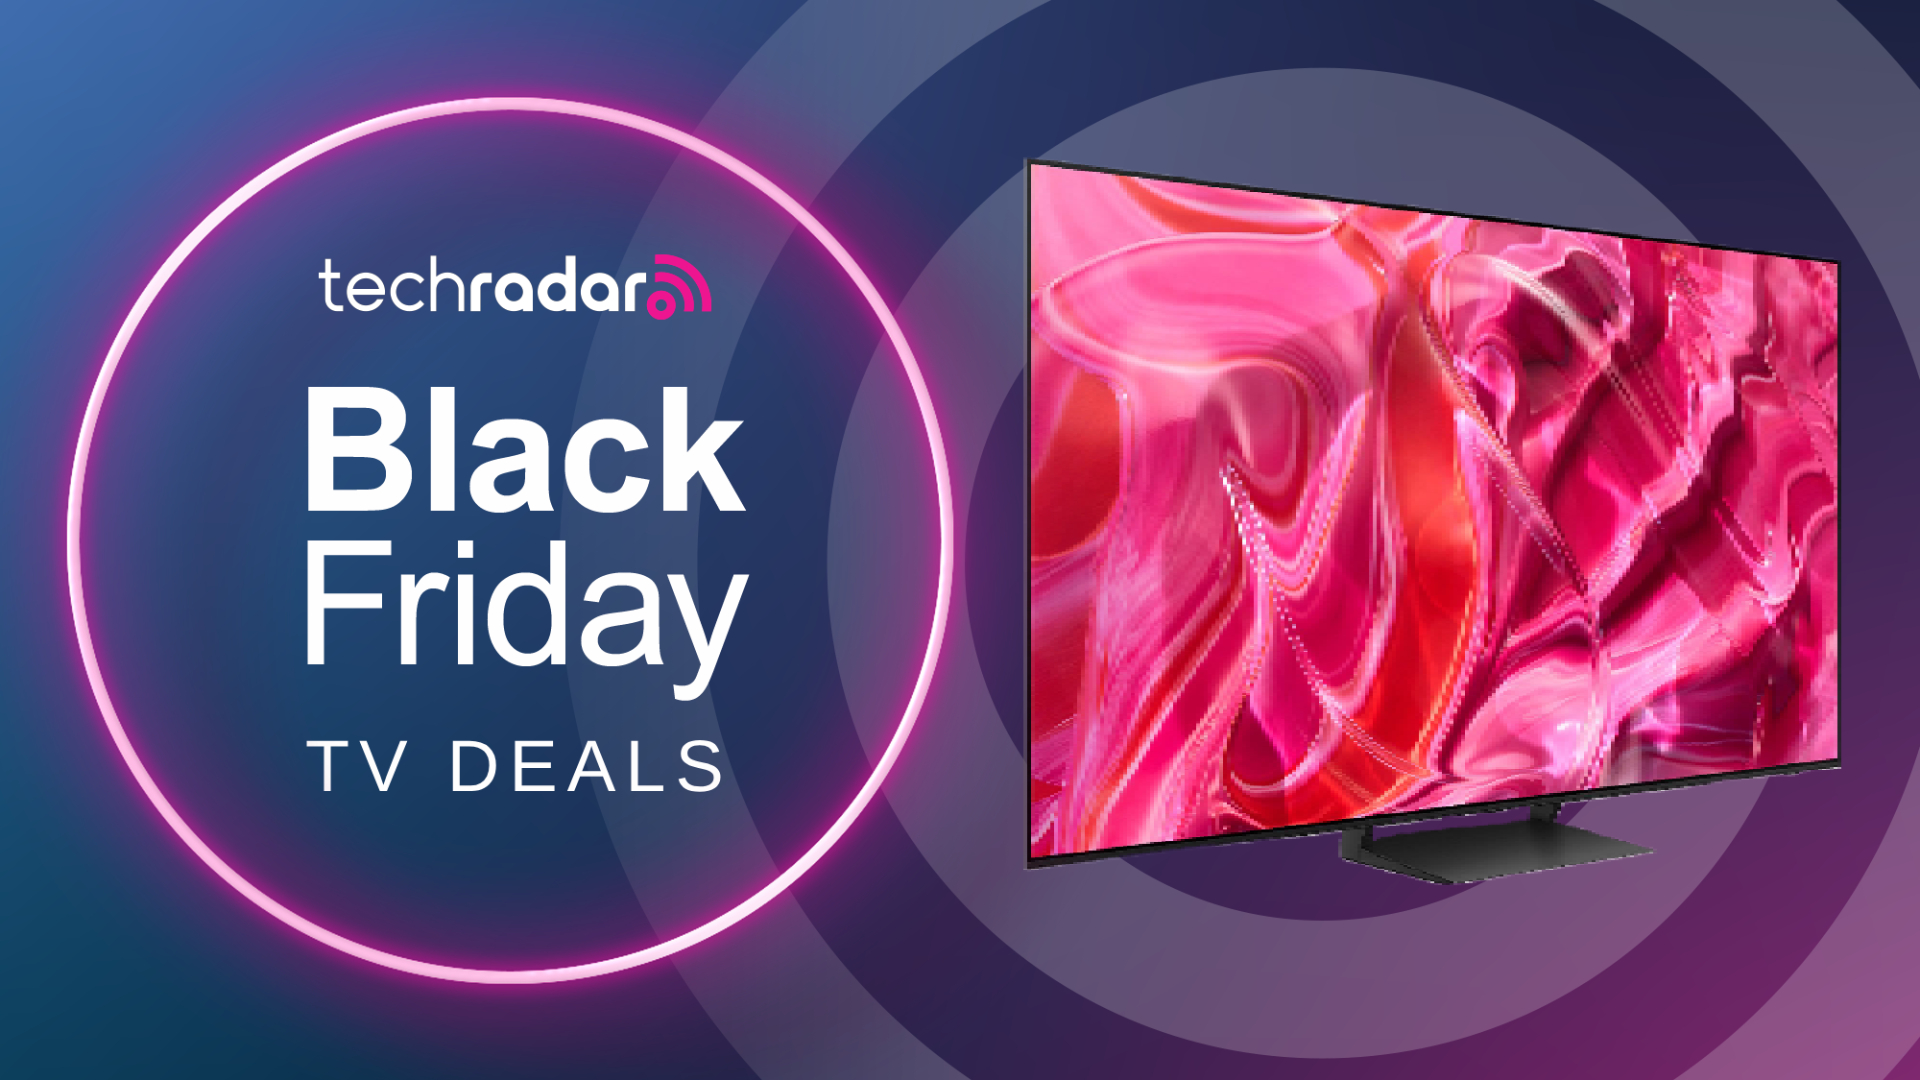 These are our favorite Black Friday gaming TV deals for PC gamers